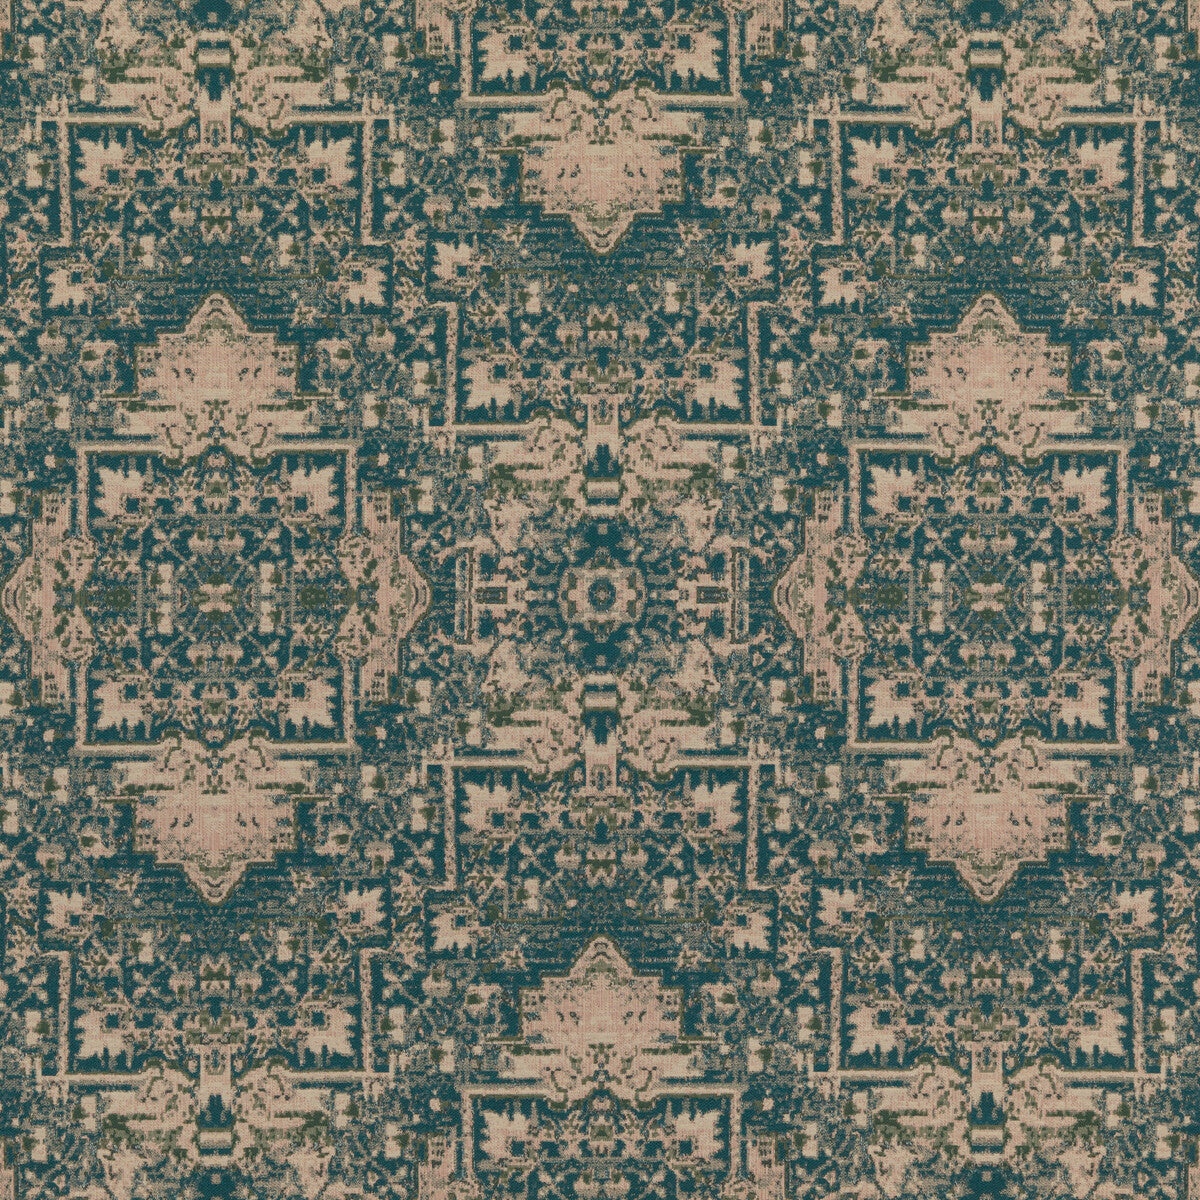 Faded Tapestry fabric in teal color - pattern FD782.R122.0 - by Mulberry in the Modern Country I collection